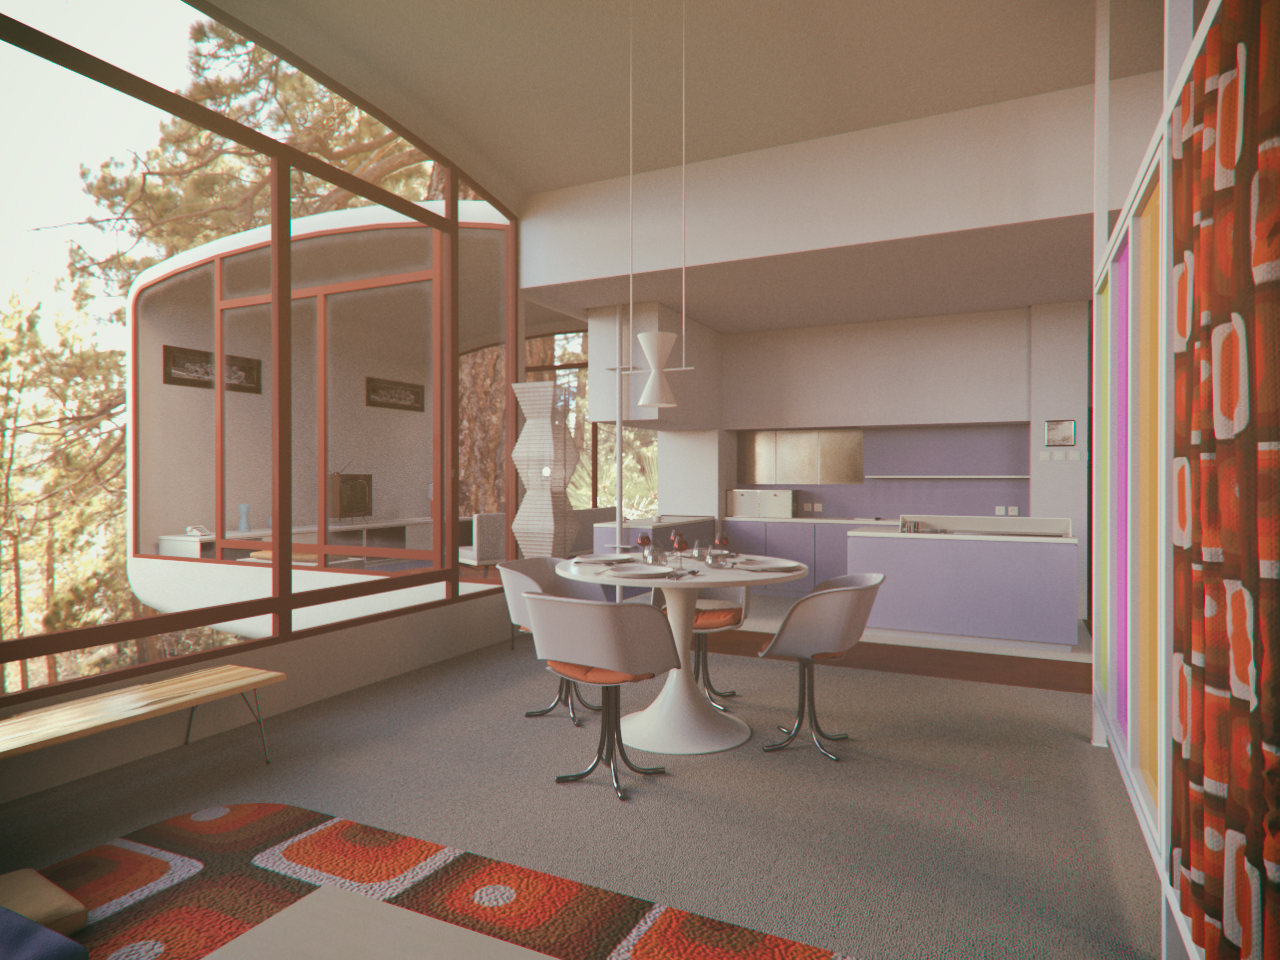 70s Modern House by: Mely3D, 3D Models by Daz 3D